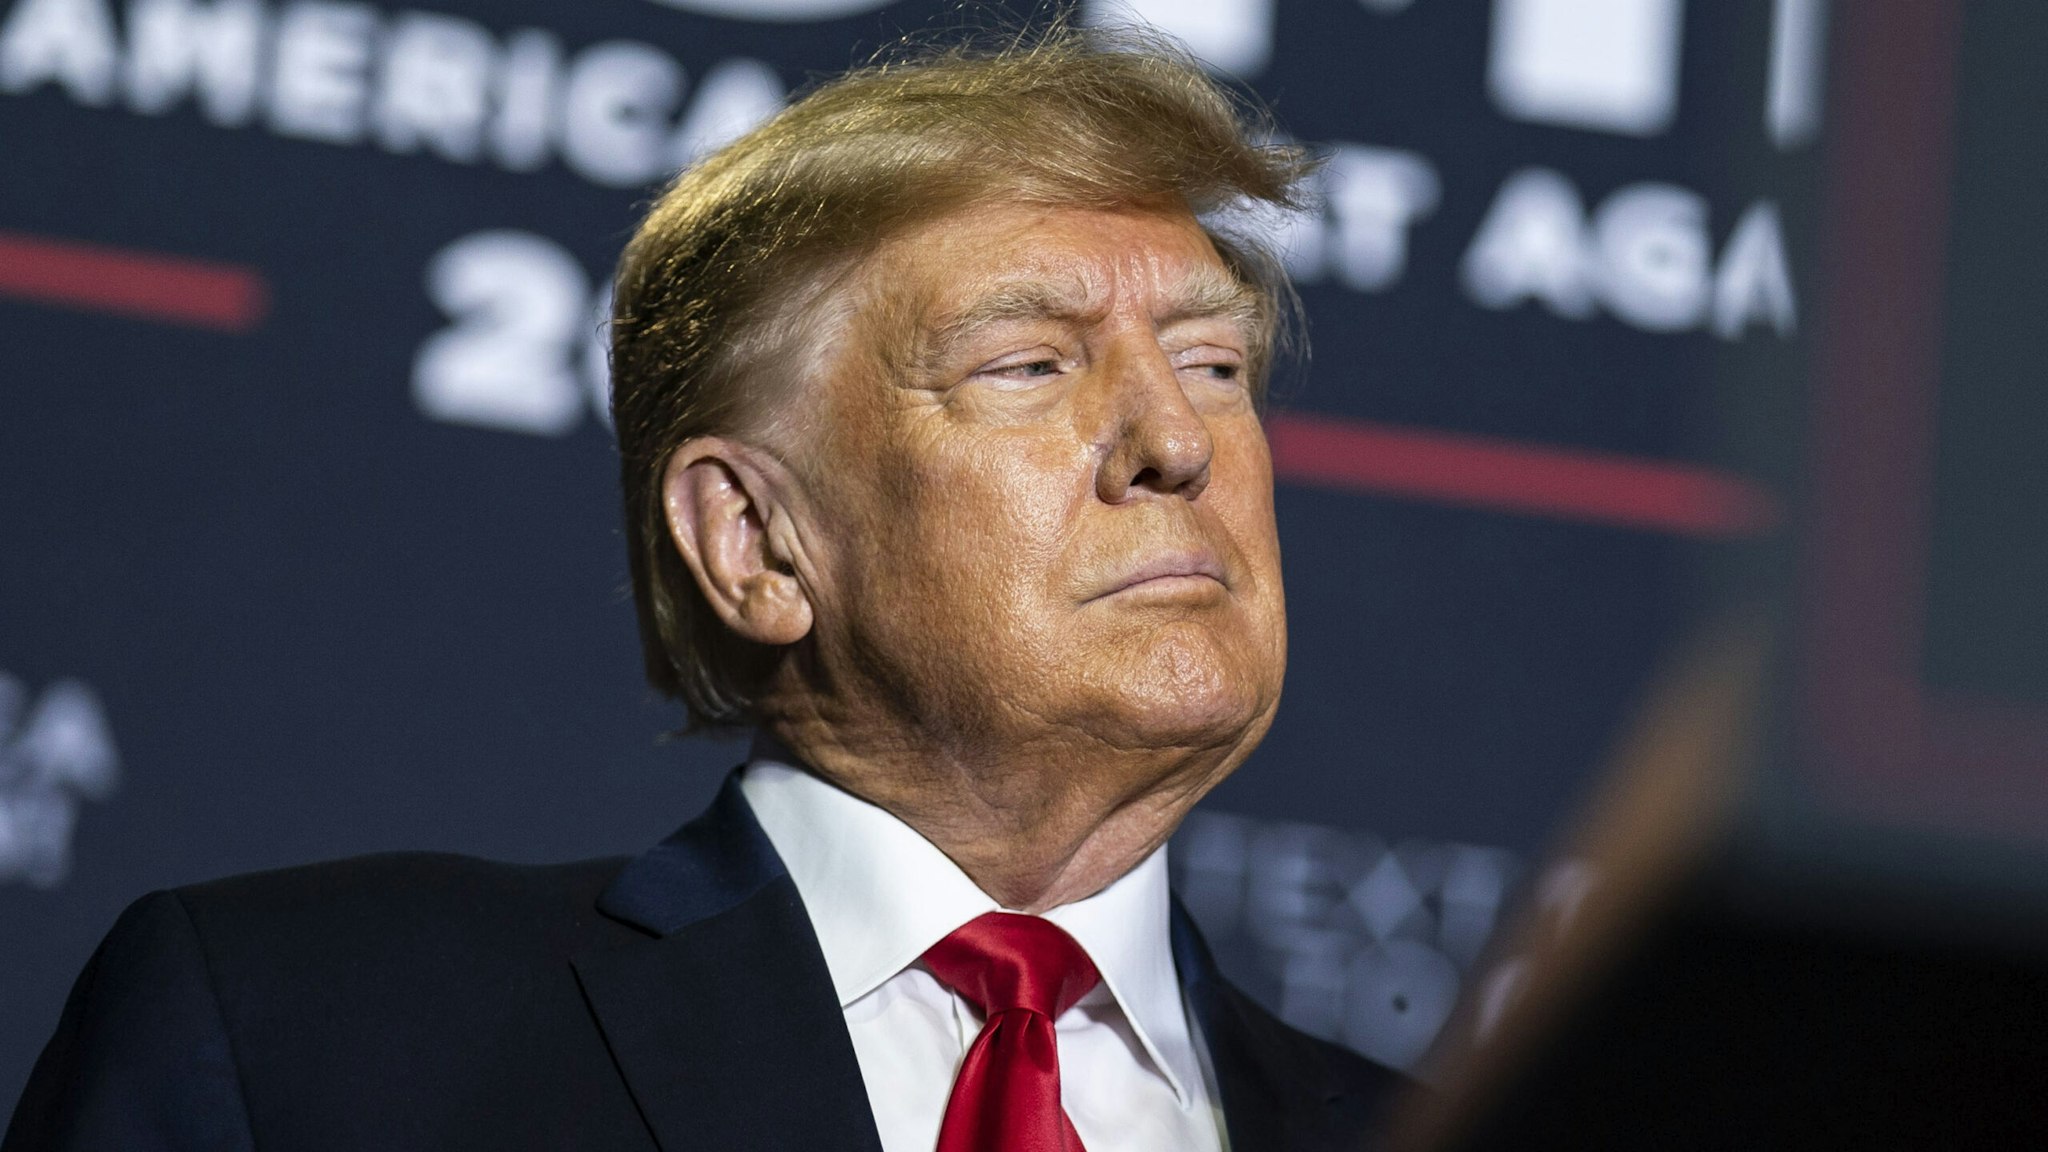 Manchester, NH - April 27 : Former President Donald Trump speaks at a campaign event at the DoubleTree Manchester Downtown on Thursday, April 27, 2023, in Manchester, NH.